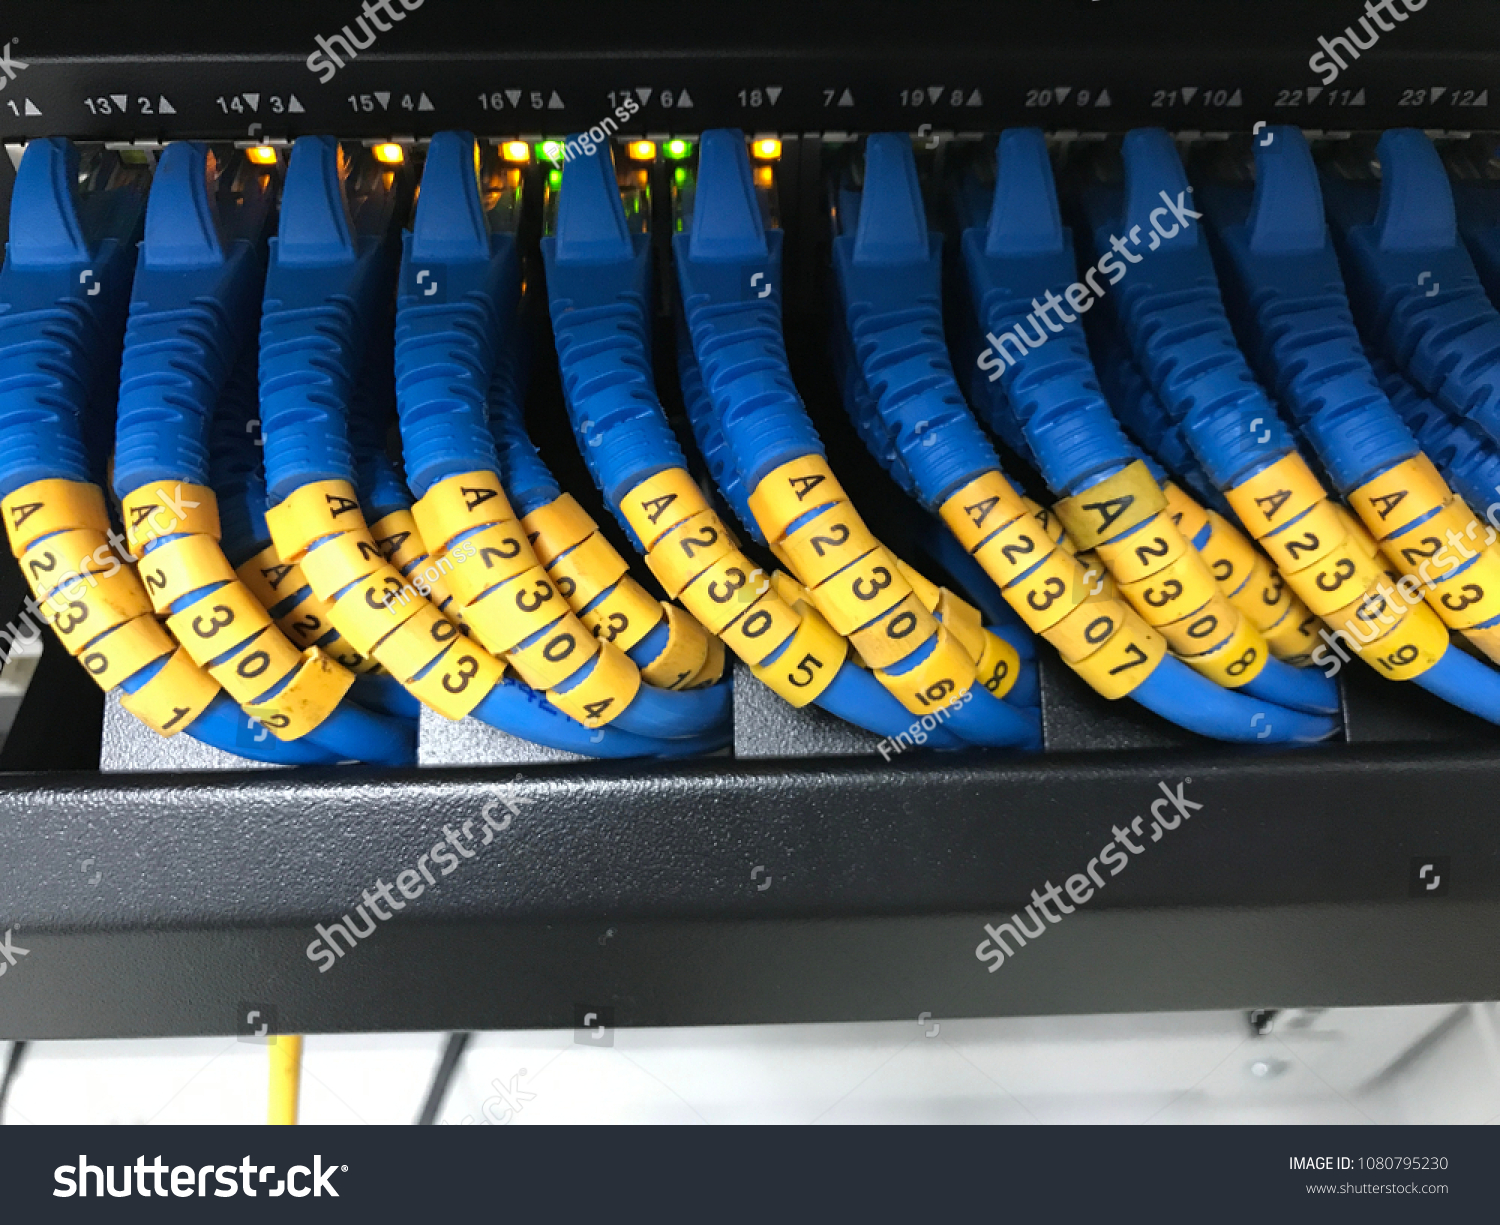 rack switch patch panel